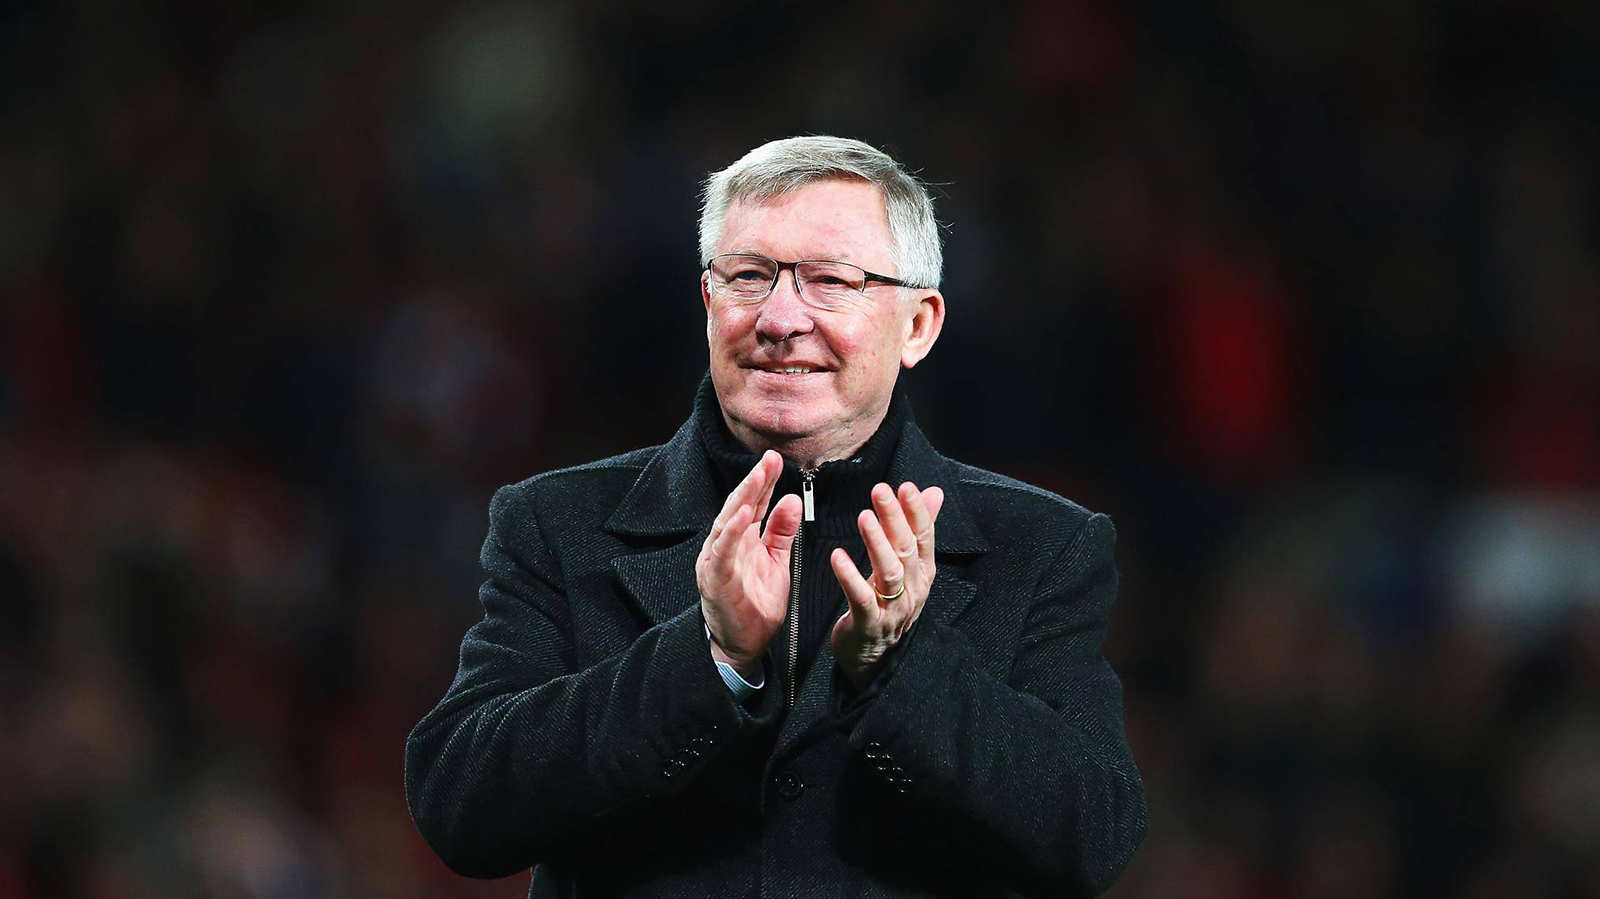 Sir Alex Ferguson’s amazing acts of kindness to Manchester United’s oldest season-ticket holder